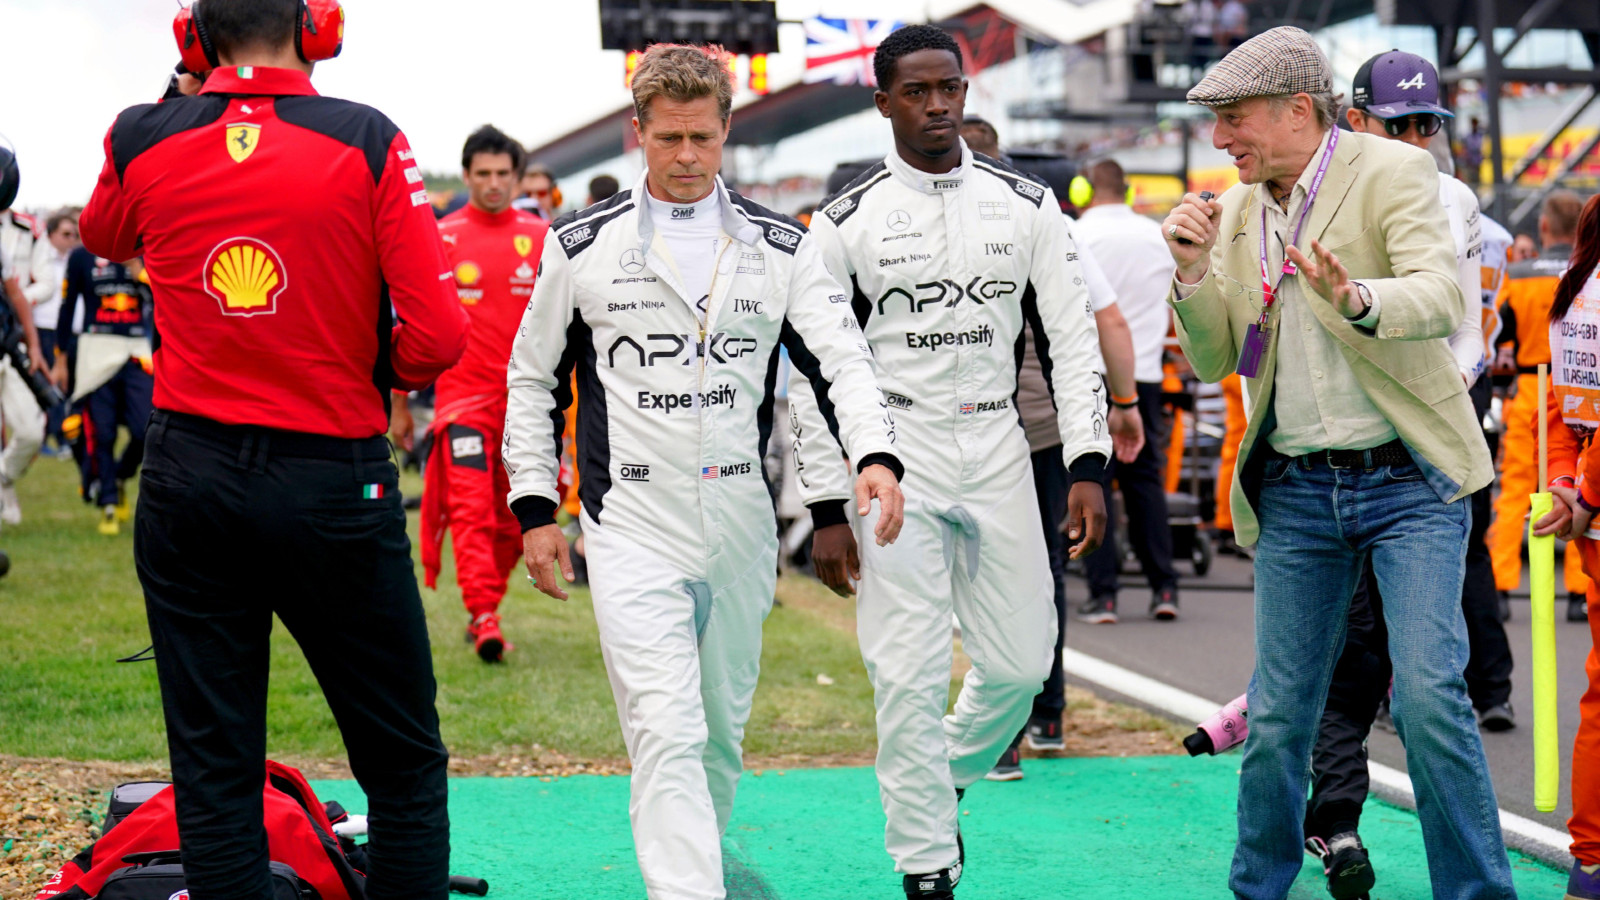 Brad Pitt F1 movie set to resume filming but not with F1 : PlanetF1